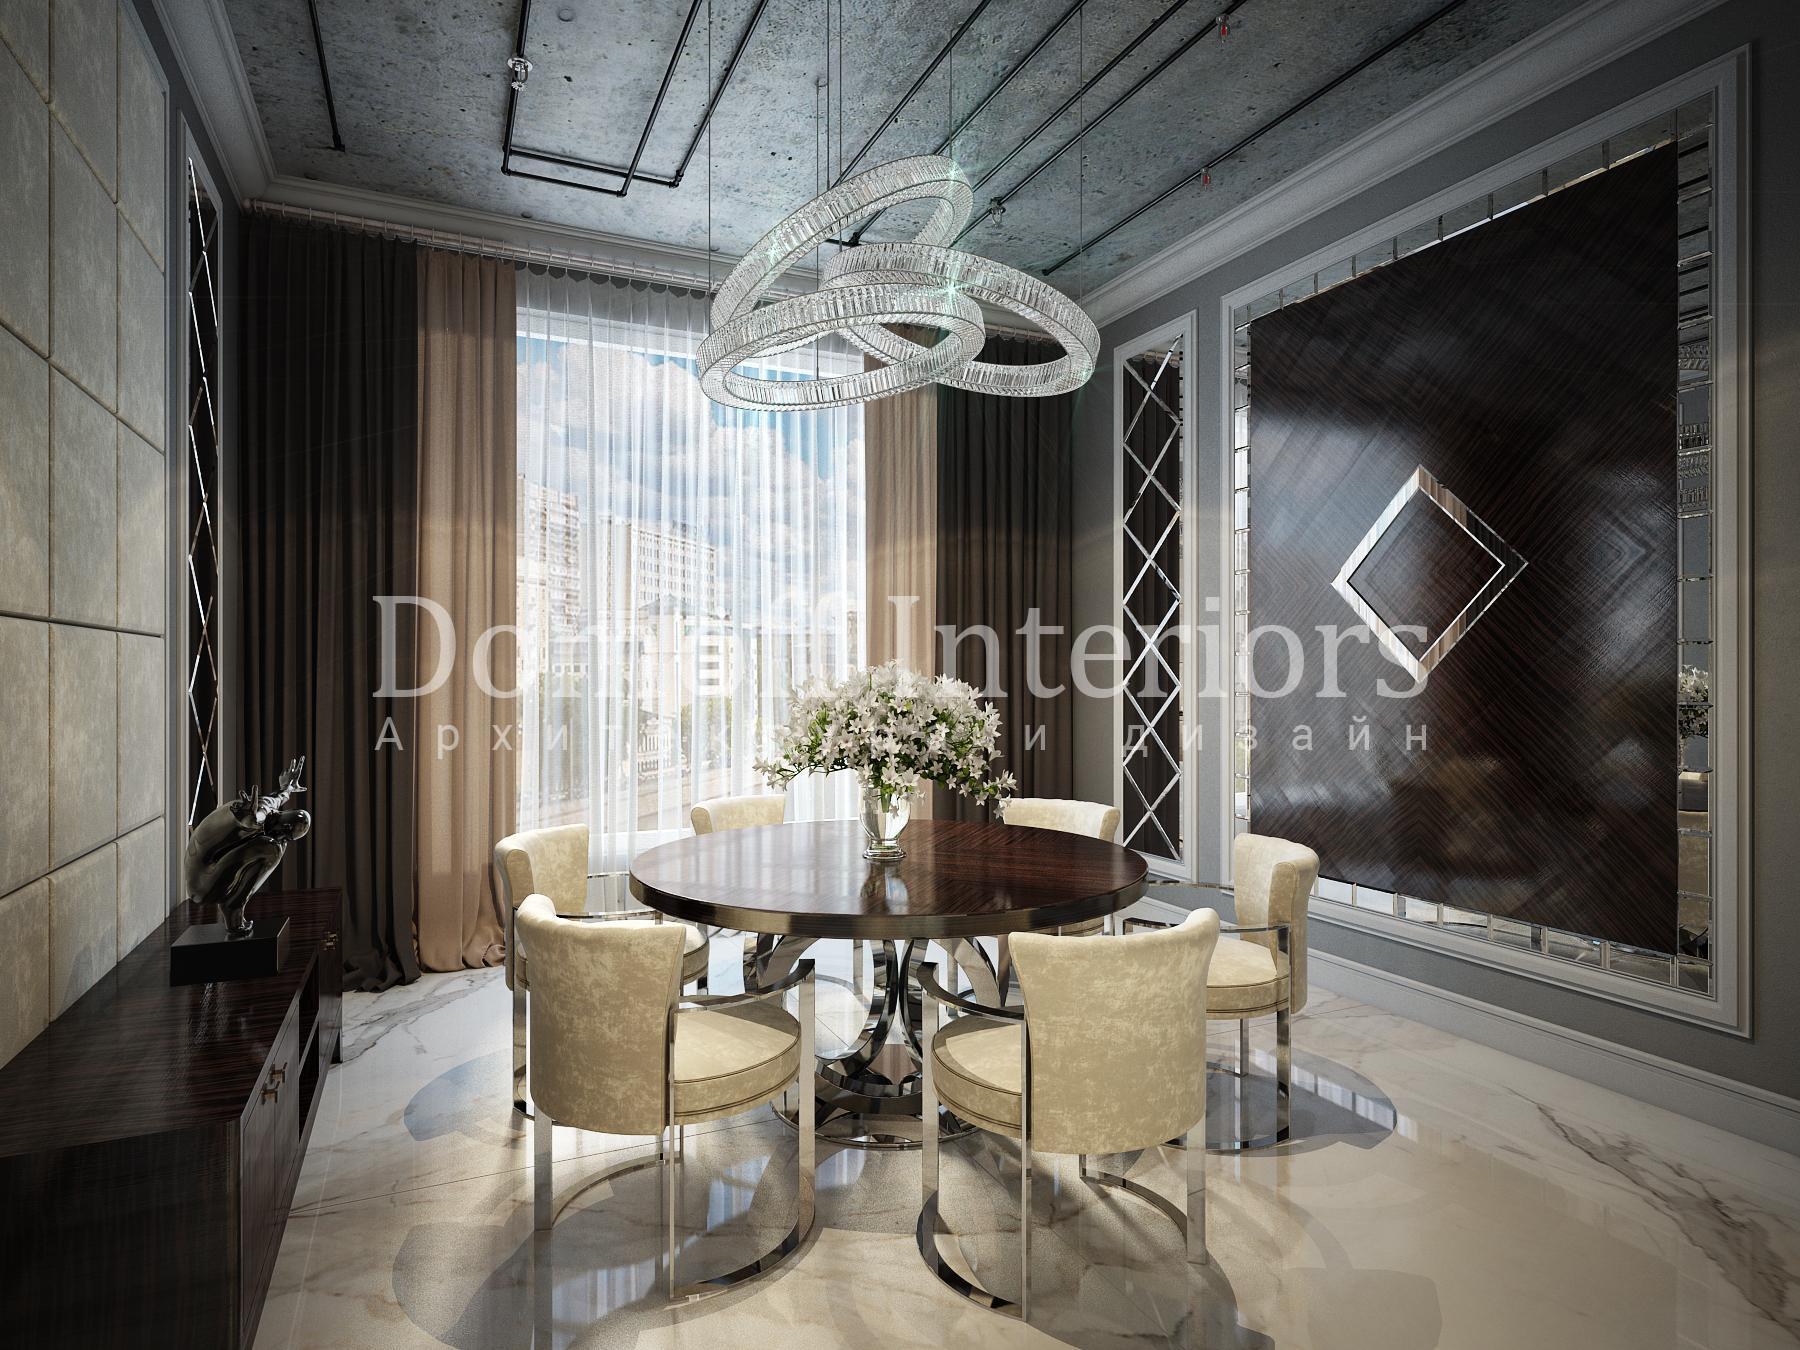 Conference room made in the style of Contemporary classics